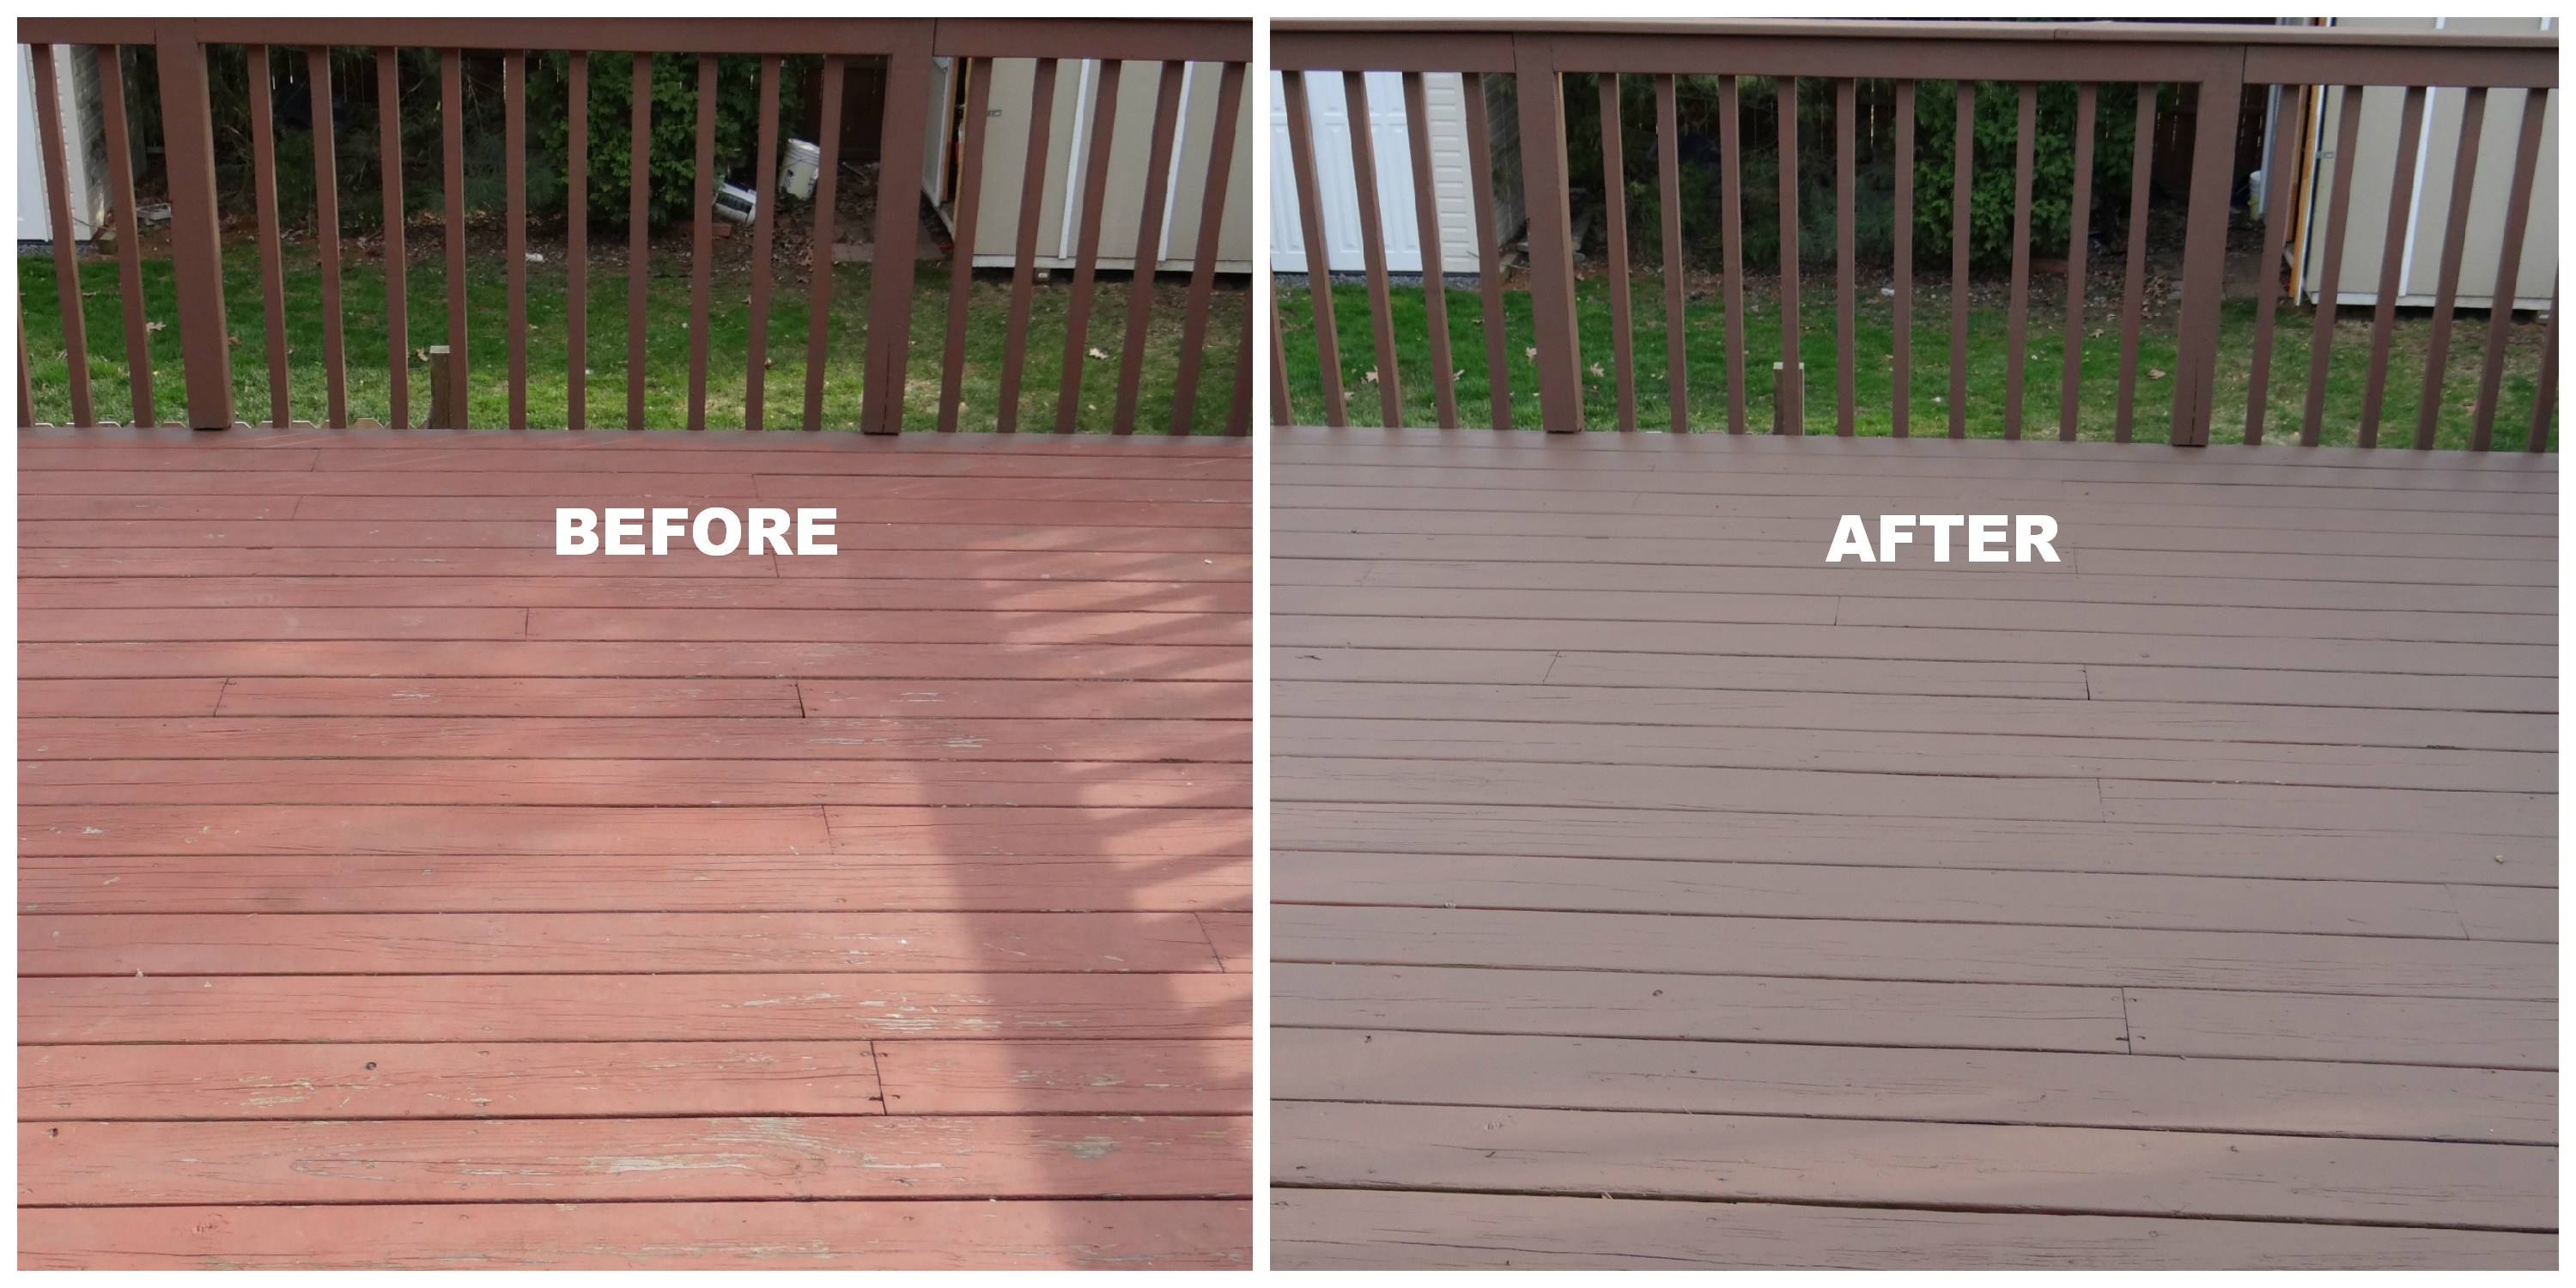 5 Things We Realize From Repainting Deck Beauteeful Living intended for size 3000 X 1500